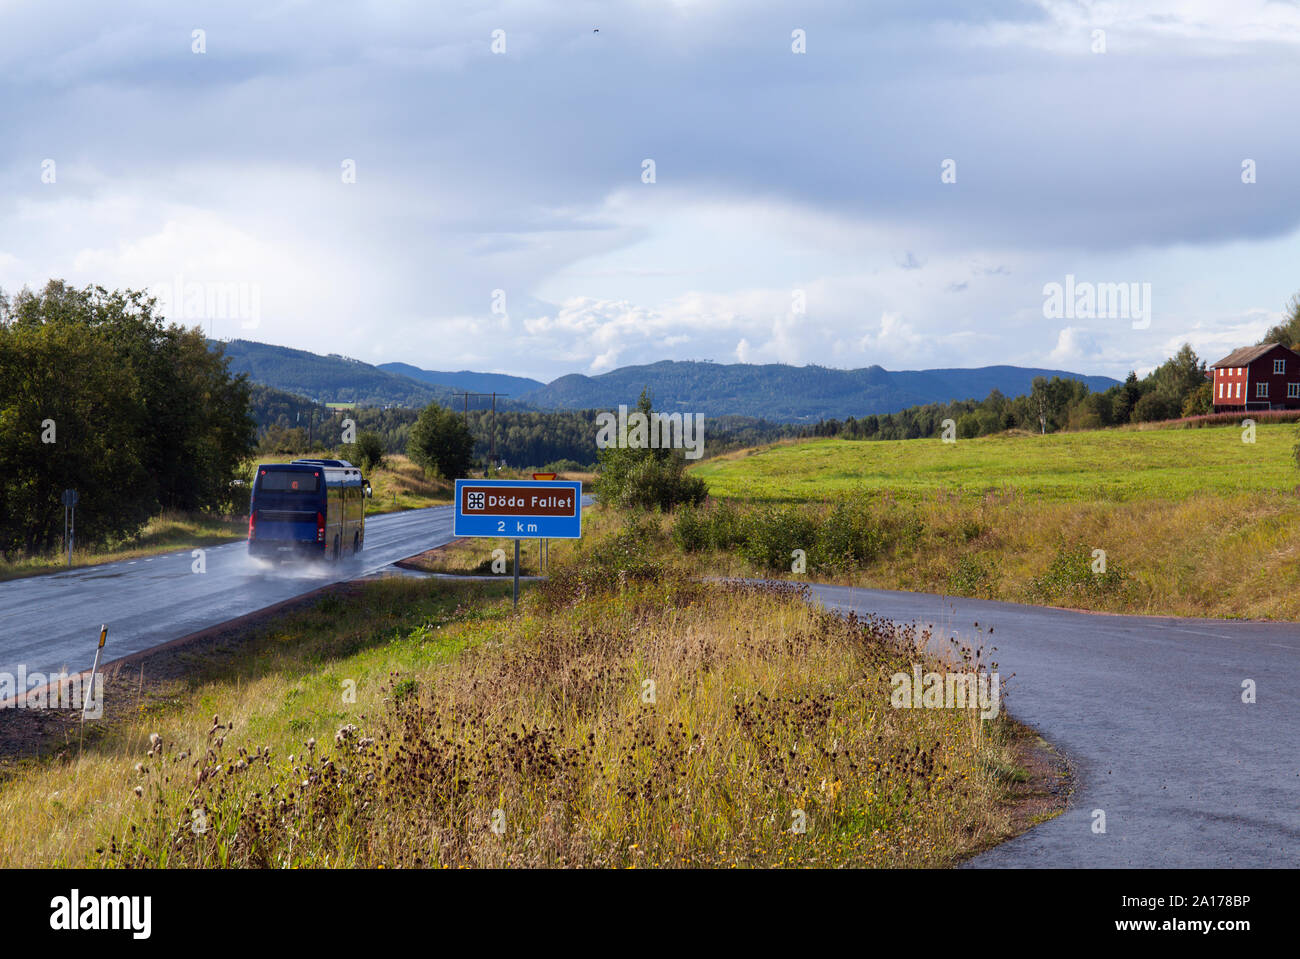 RAGUNDA, SWEDEN ON AUGUST 23, 2019. View of a bus in speed, road sign in the landscape. Editorial use. Stock Photo